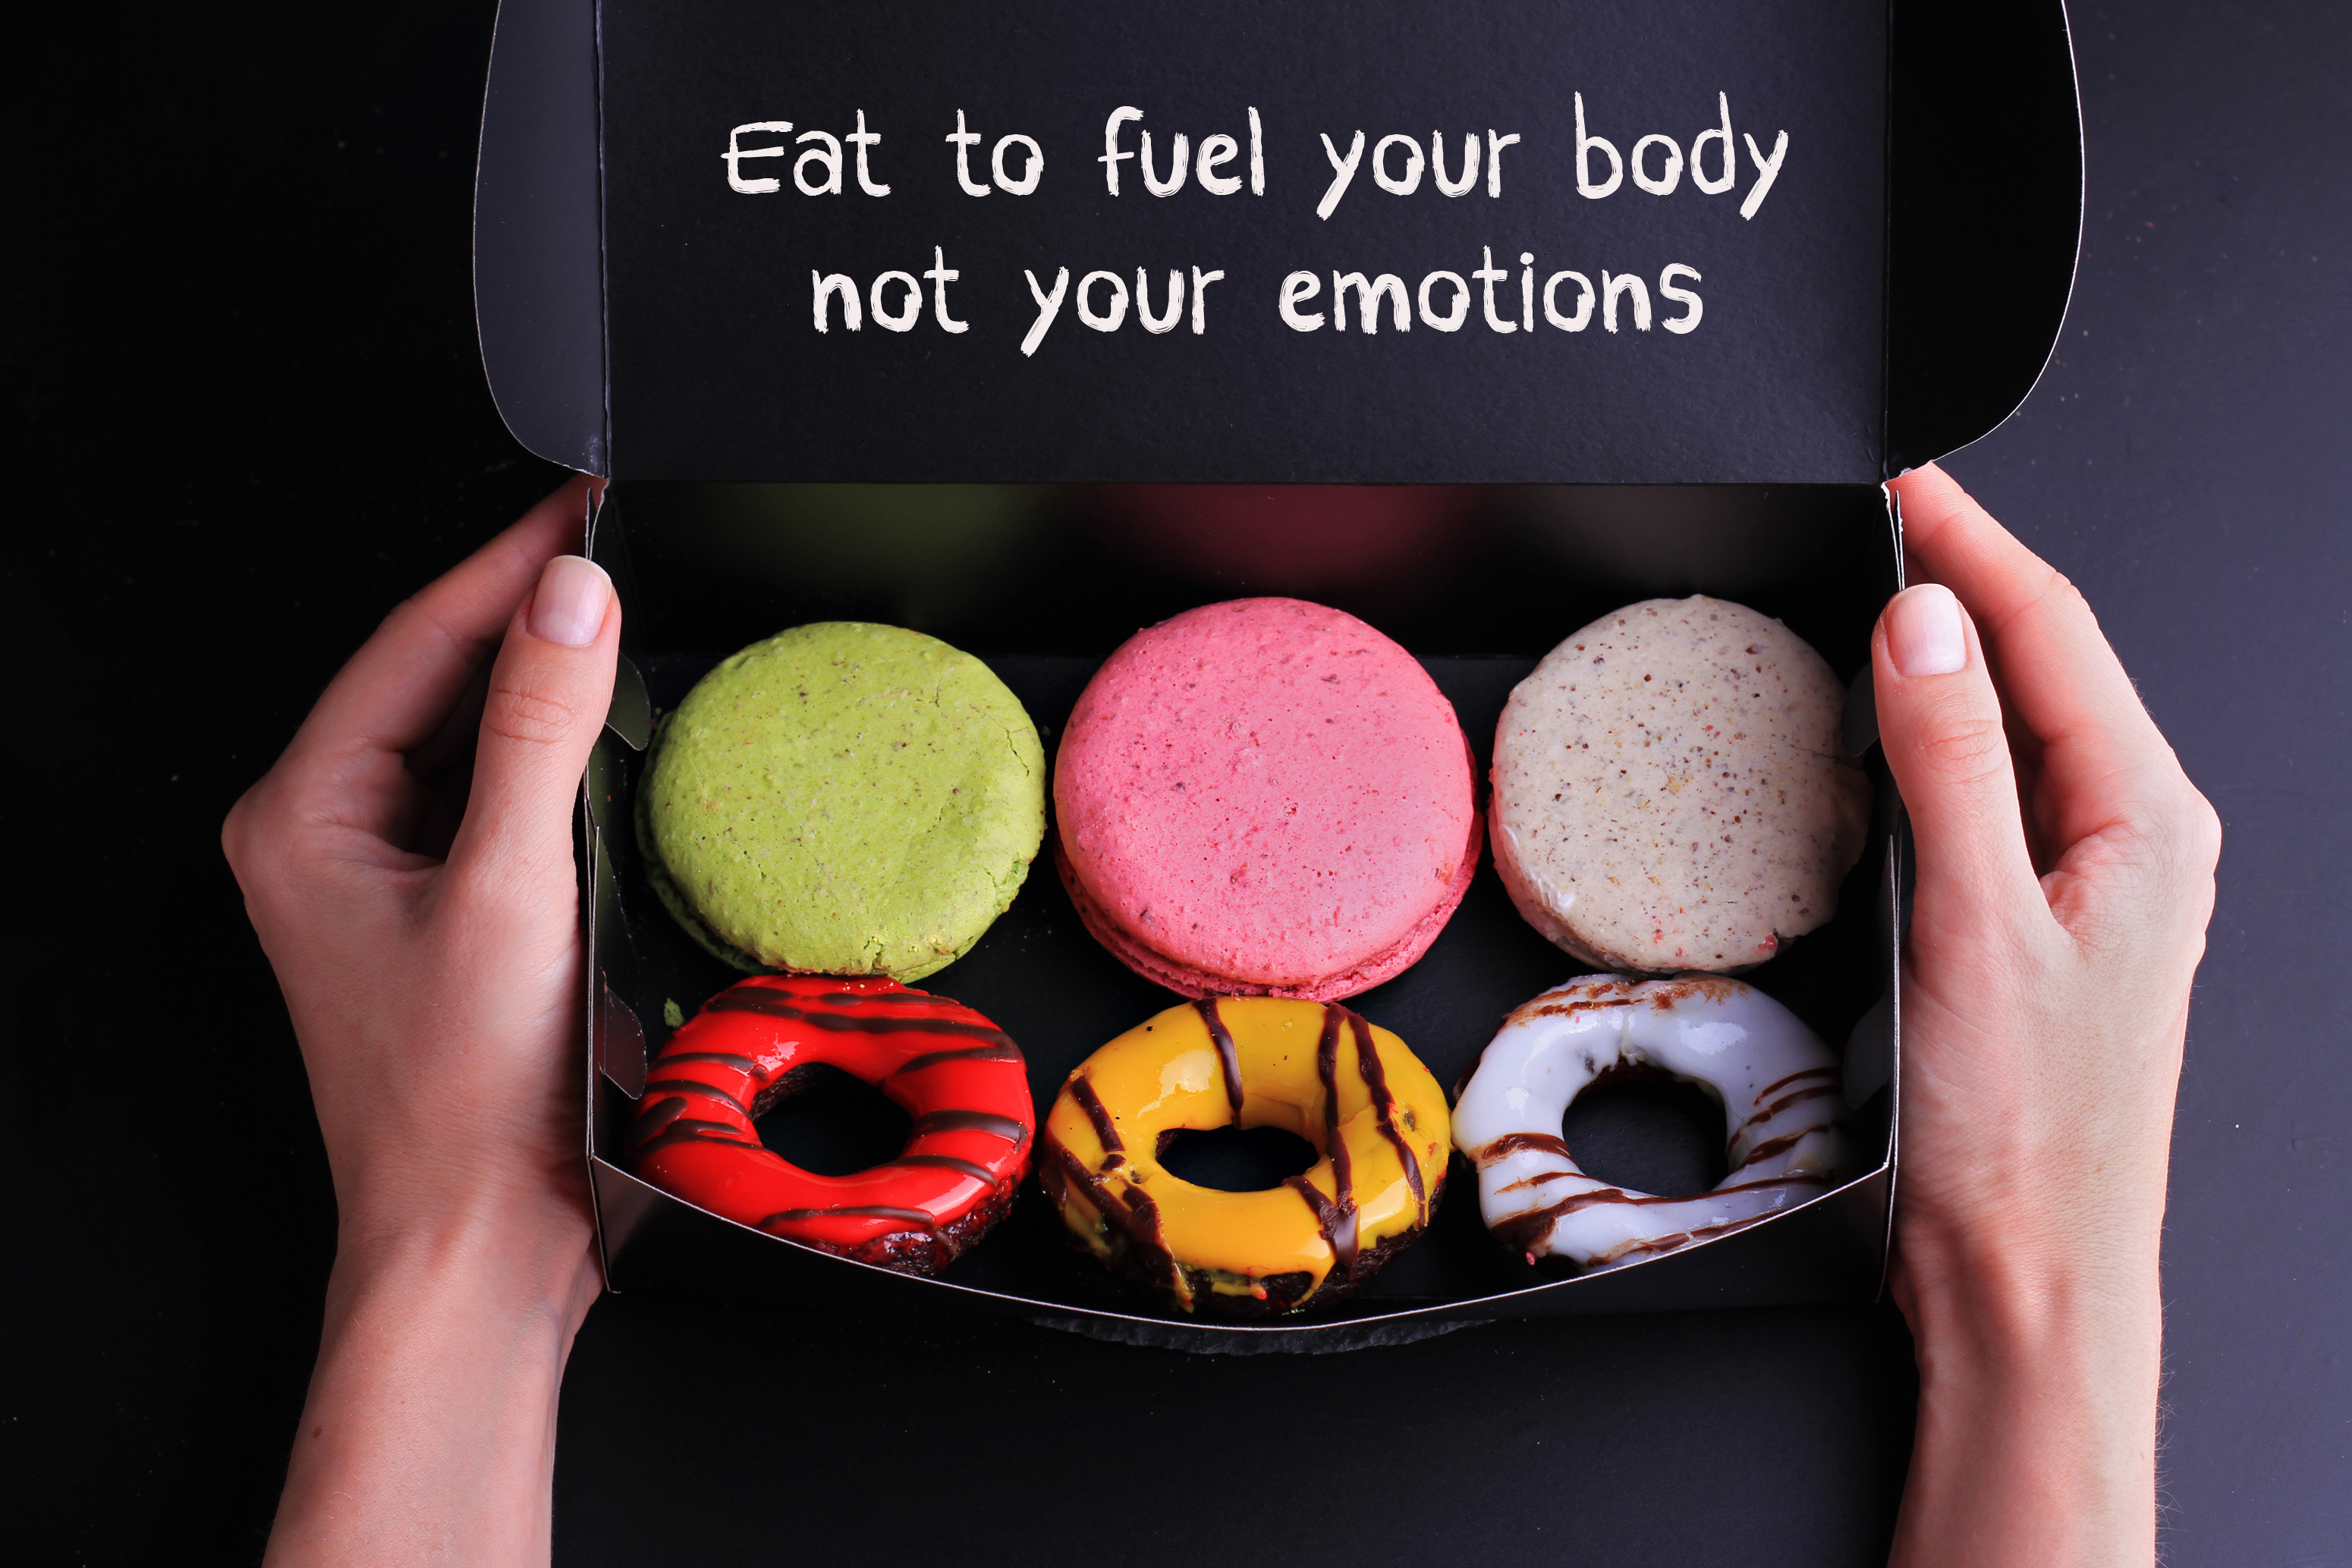 What is emotional eating? 6 snacks in a box with words saying "eat to fuel your body not your emotions." 